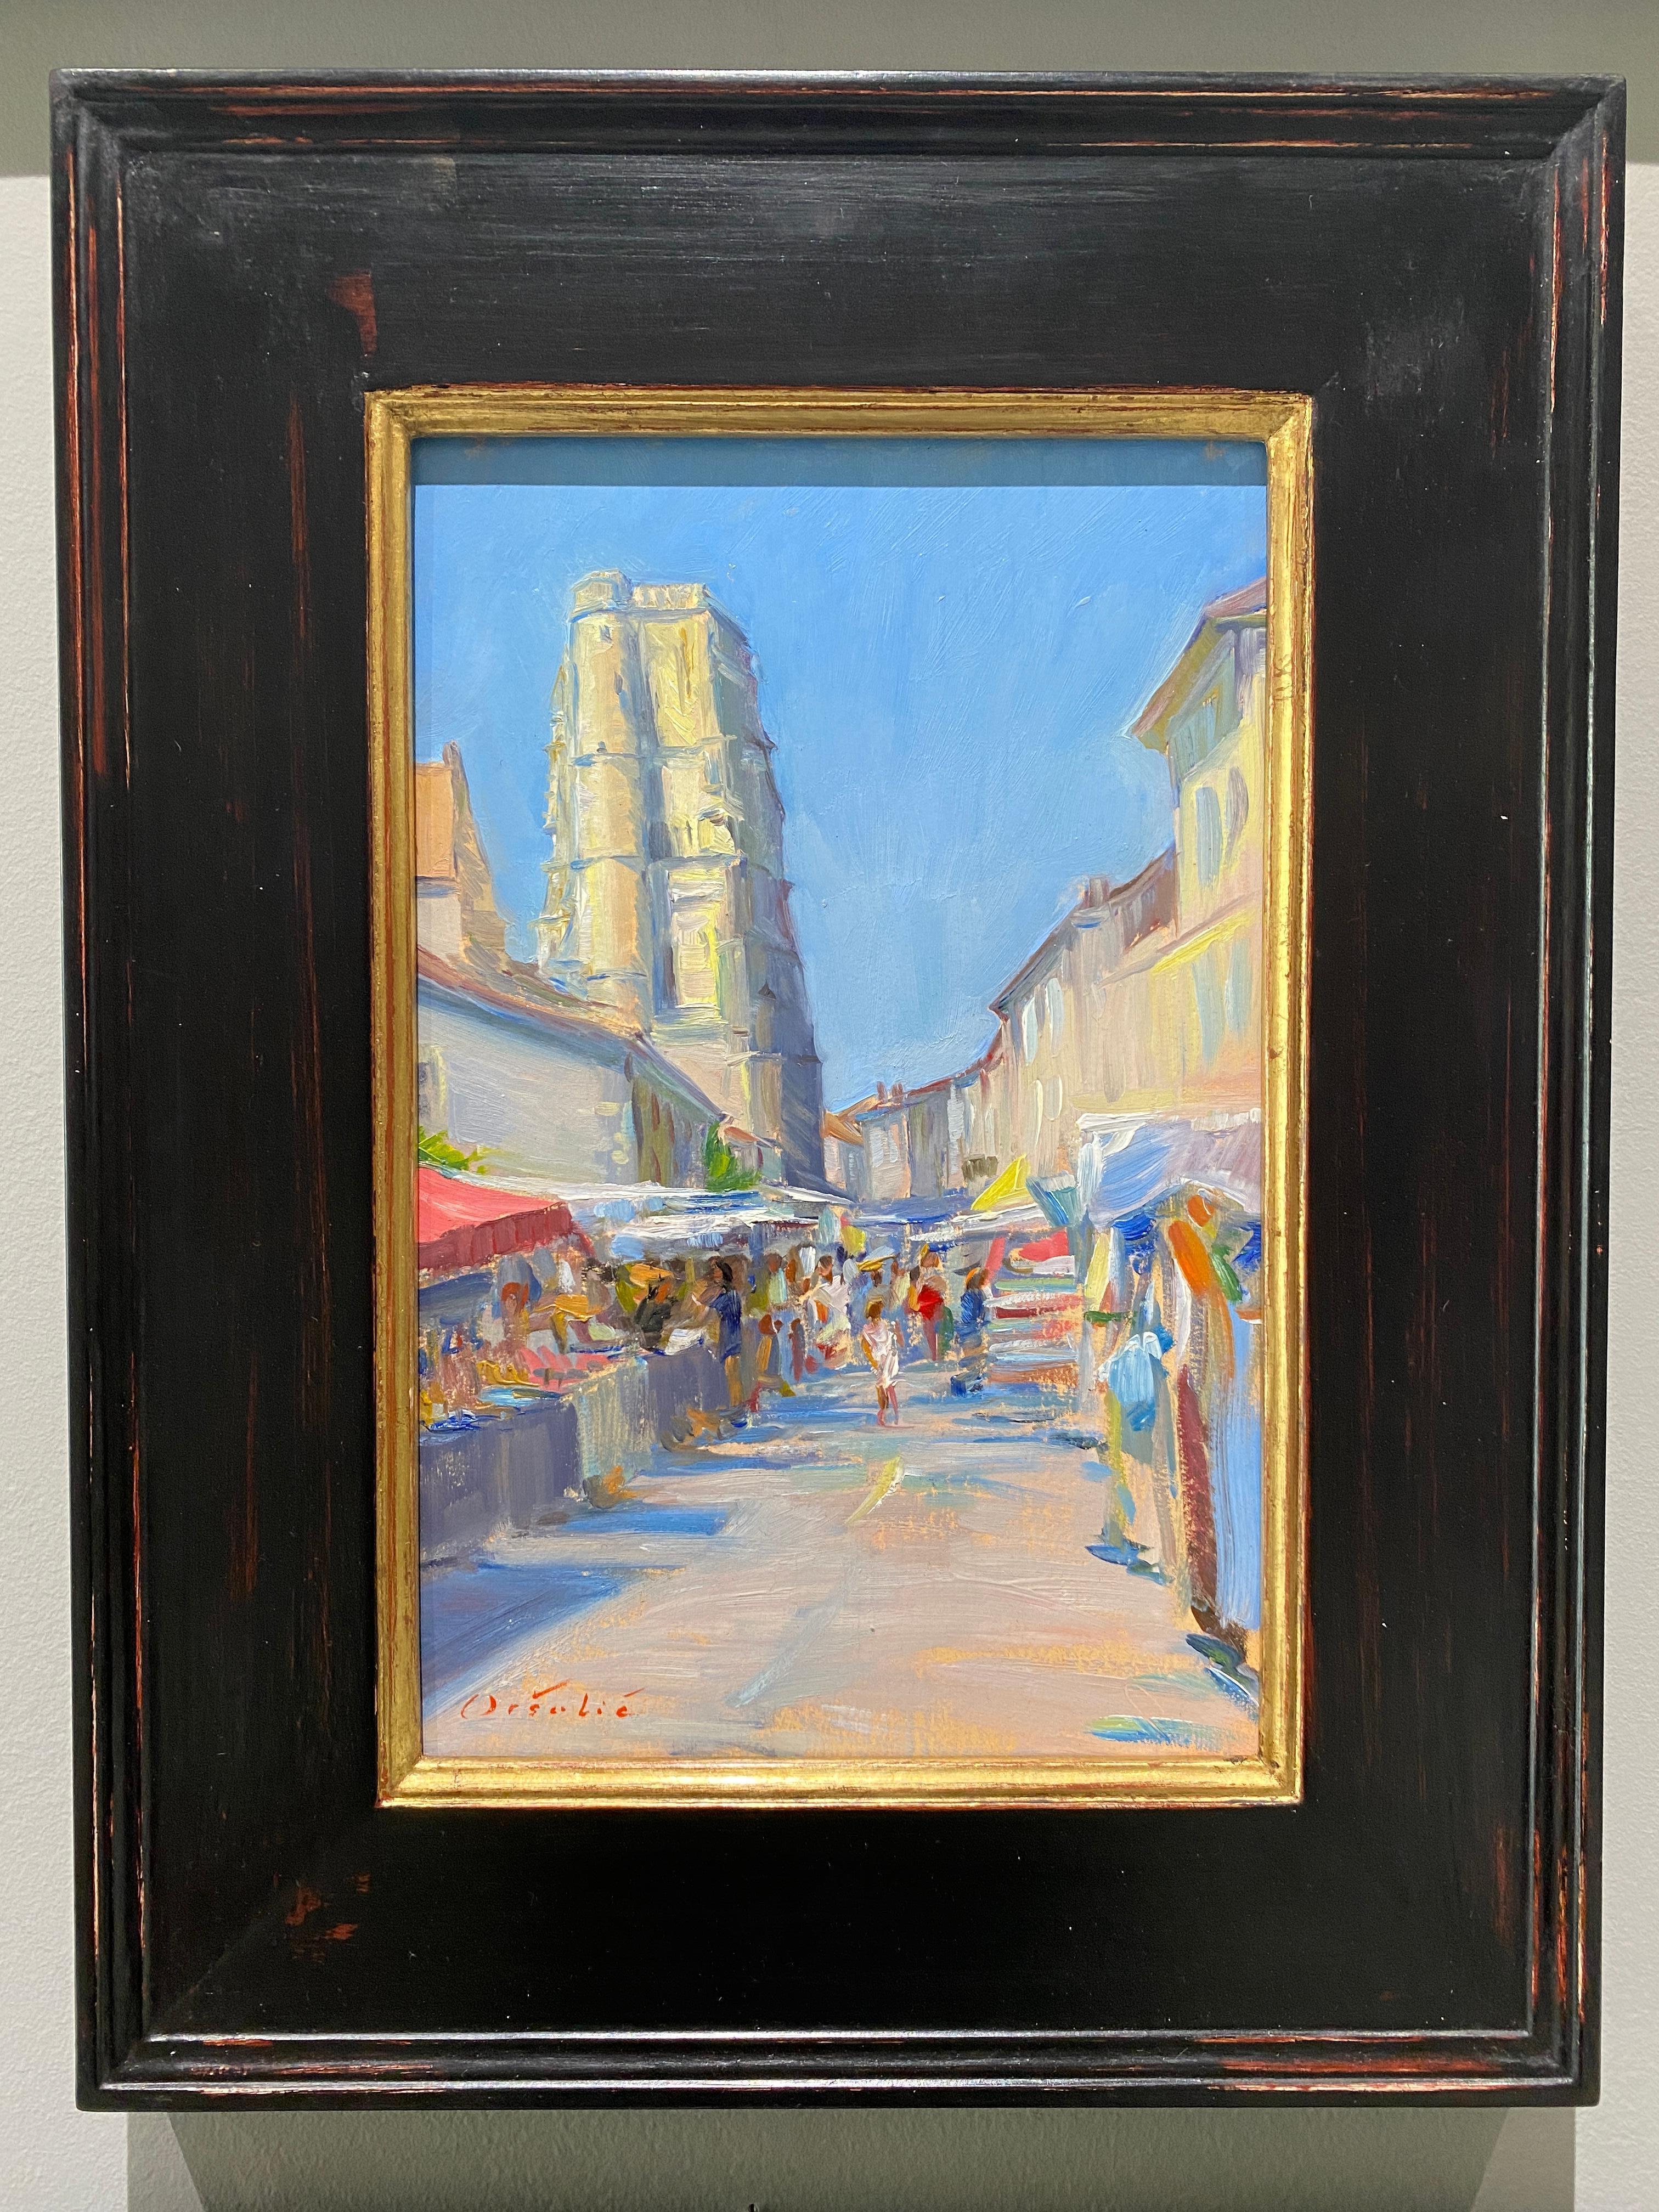 Marché Lectoure - Painting de Tina Orsolic Dalessio